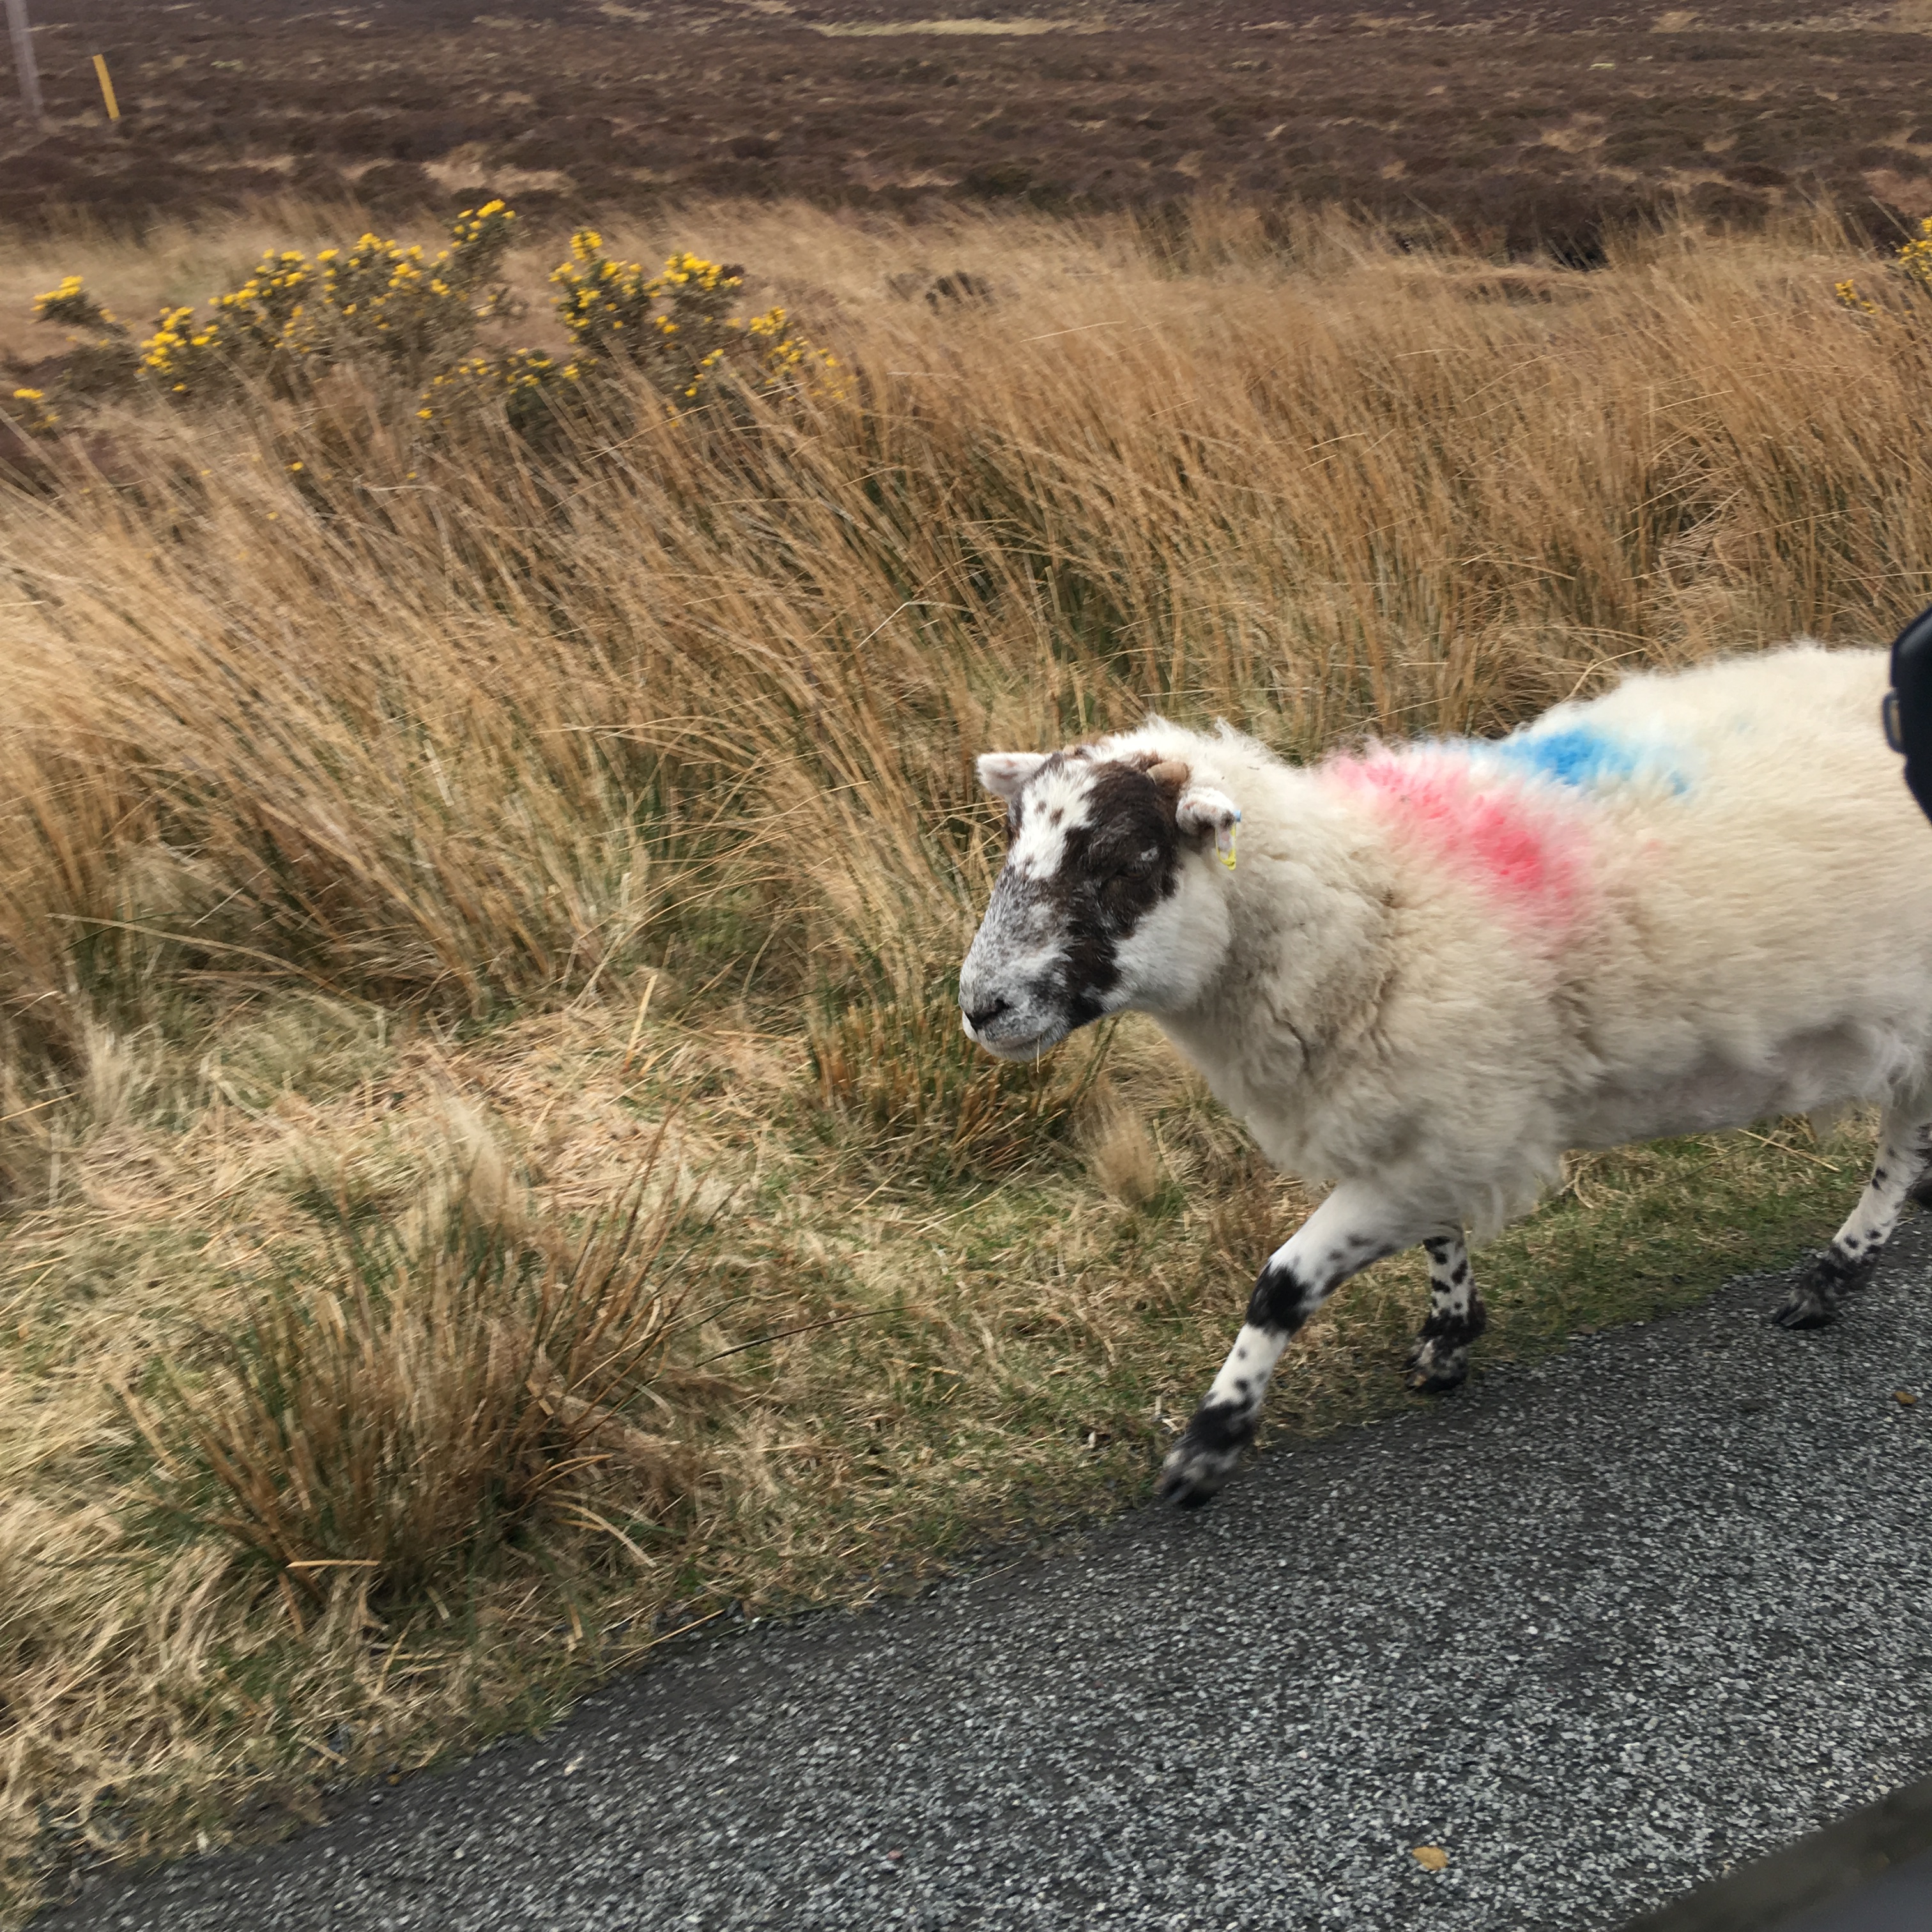 Playing with sheep in Scotland